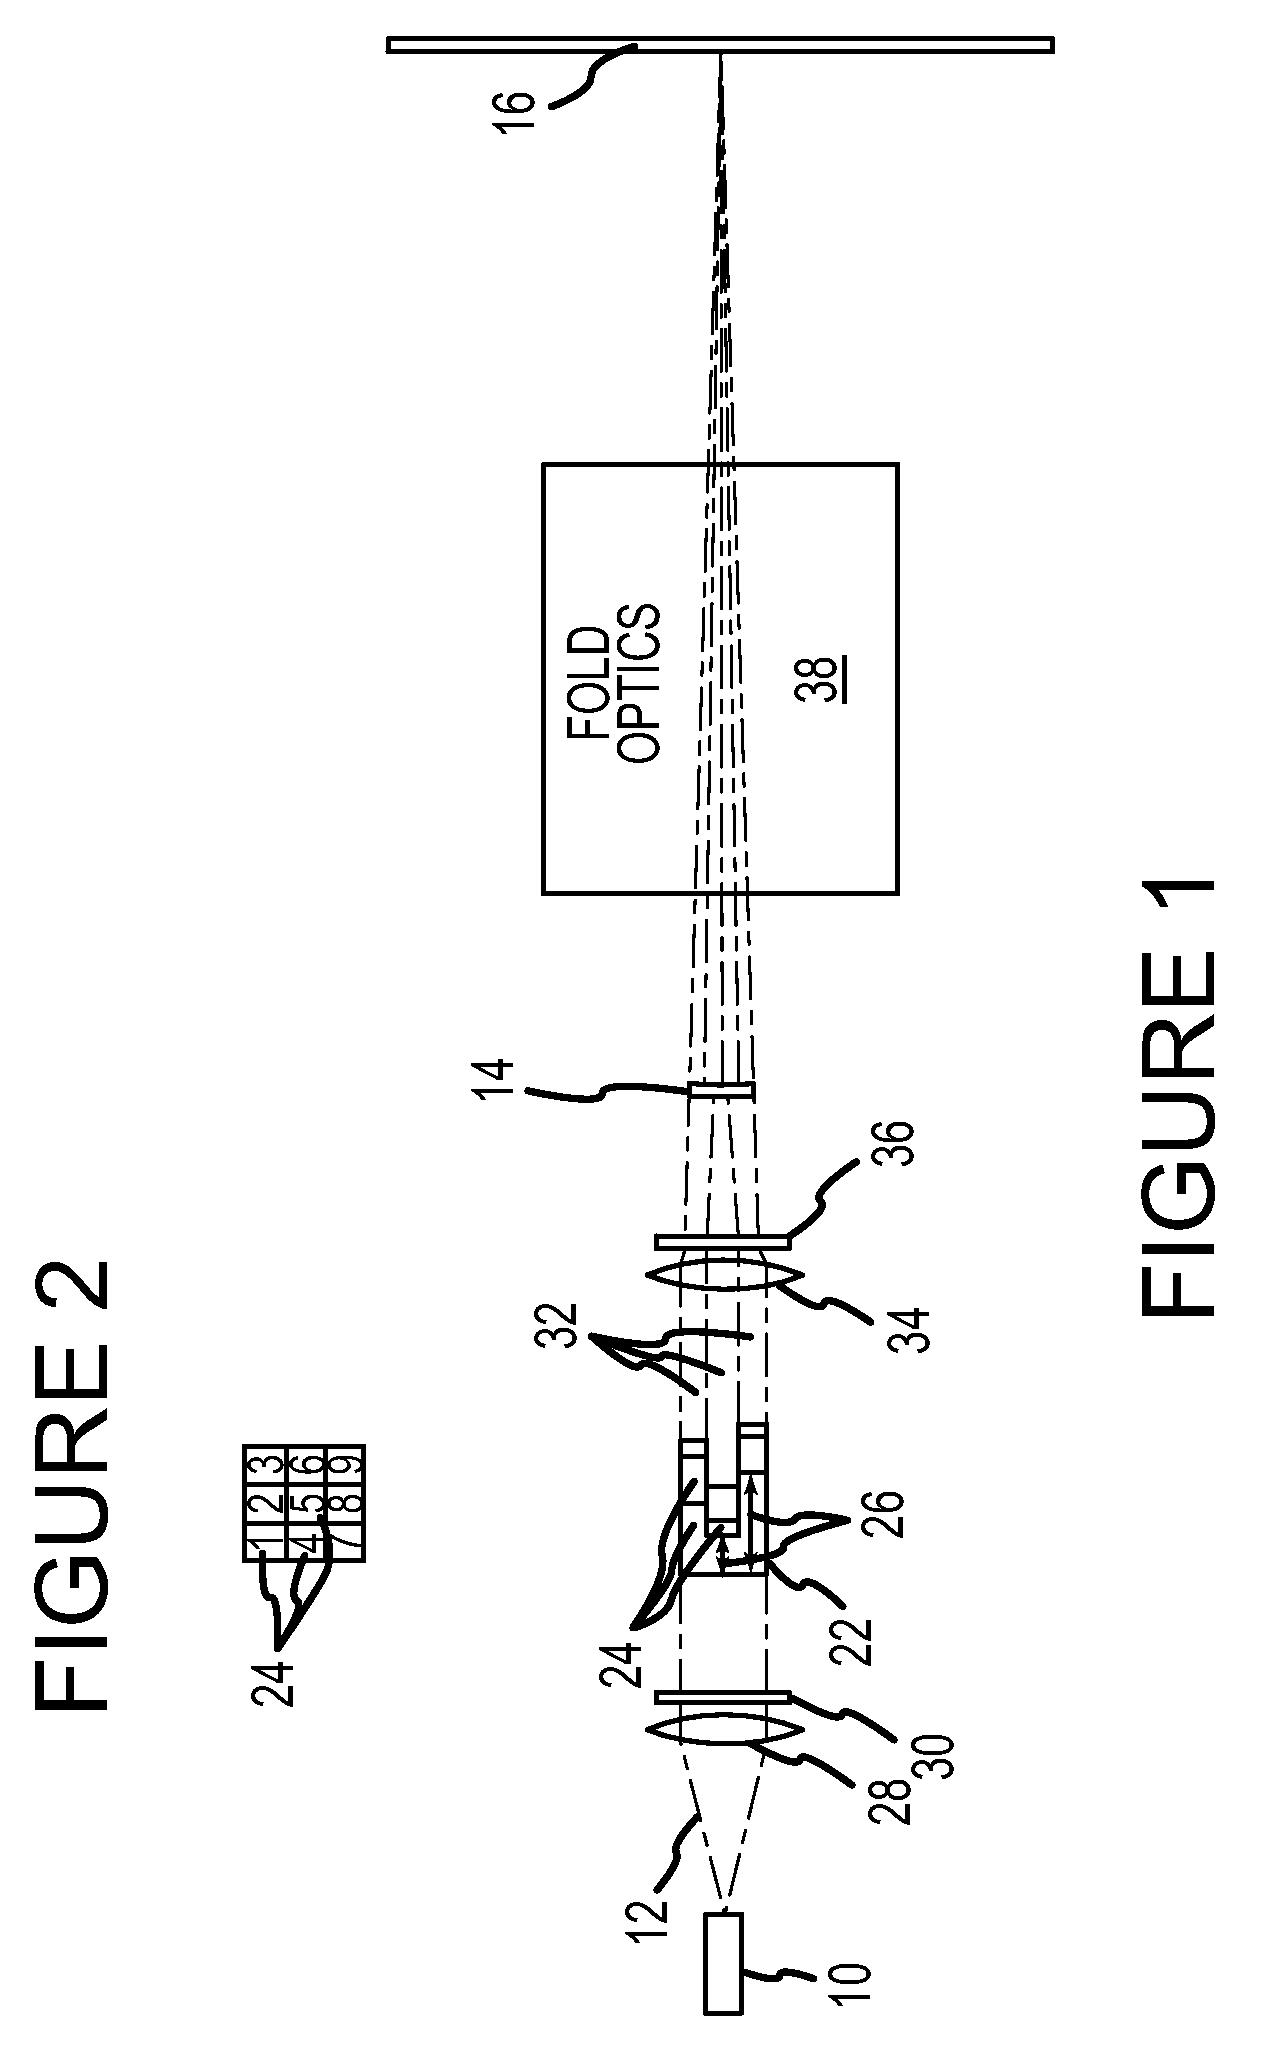 Apparent speckle reduction apparatus and method for MEMS laser projection system